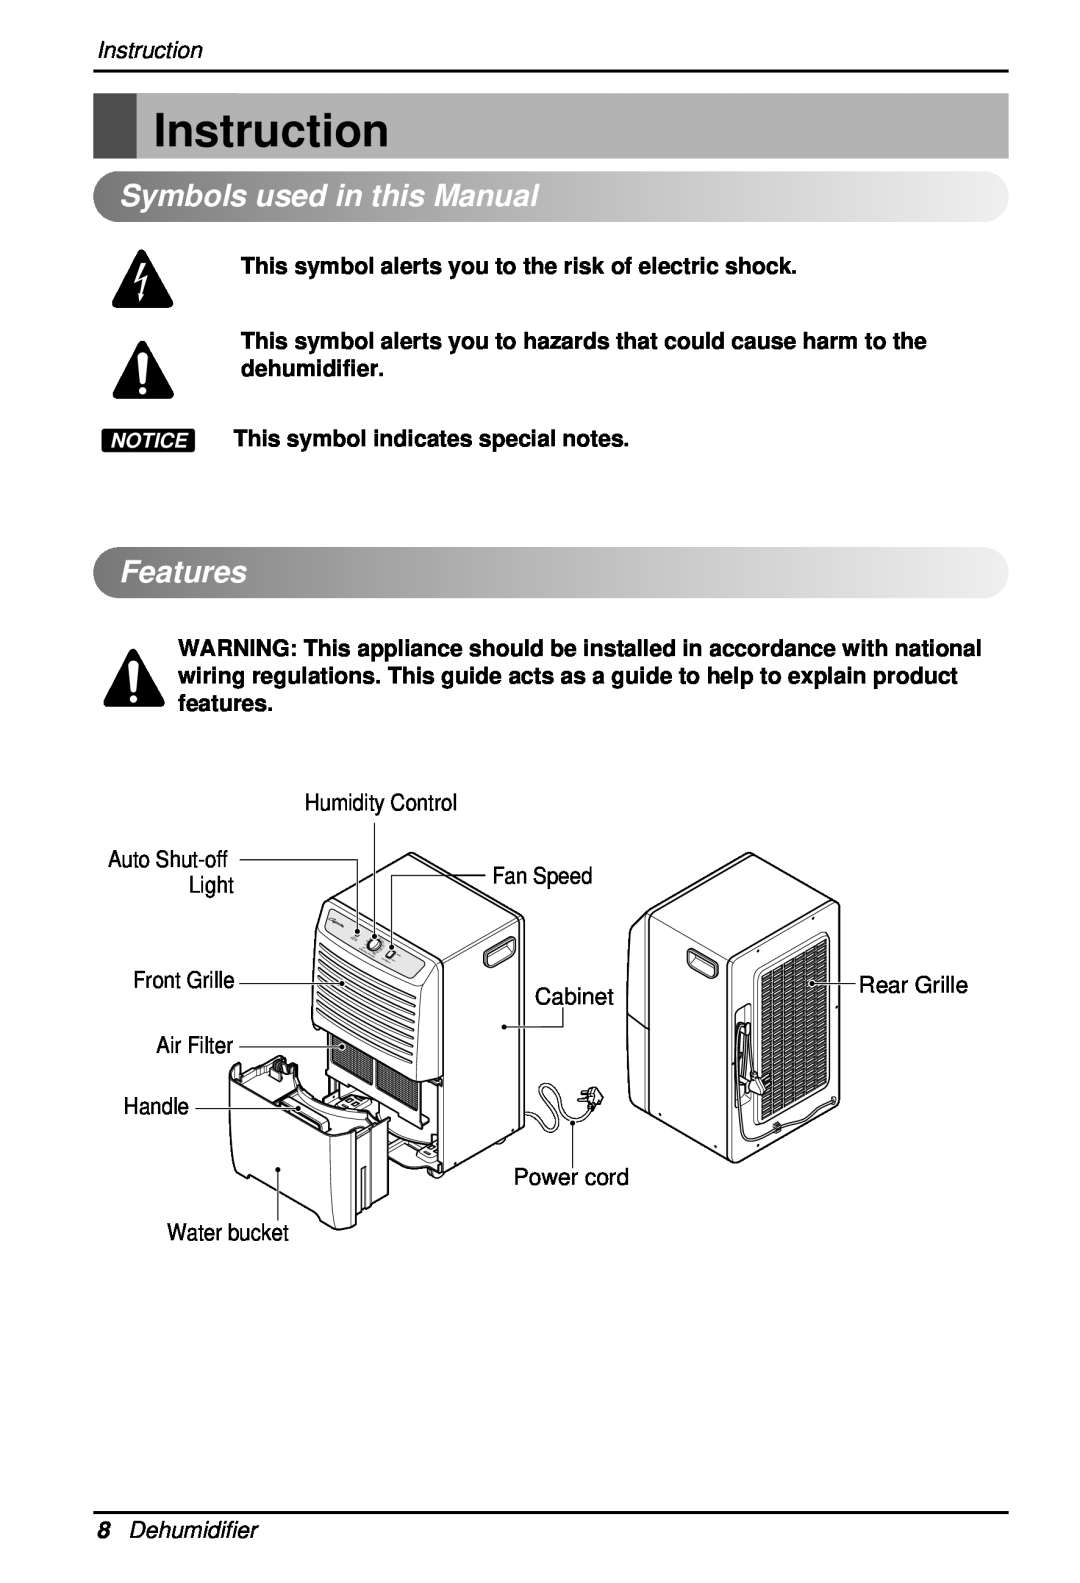 Heat Controller BHD-301 manual Instruction, SymbolsusedinthisManual, Features, 8Dehumidifier 